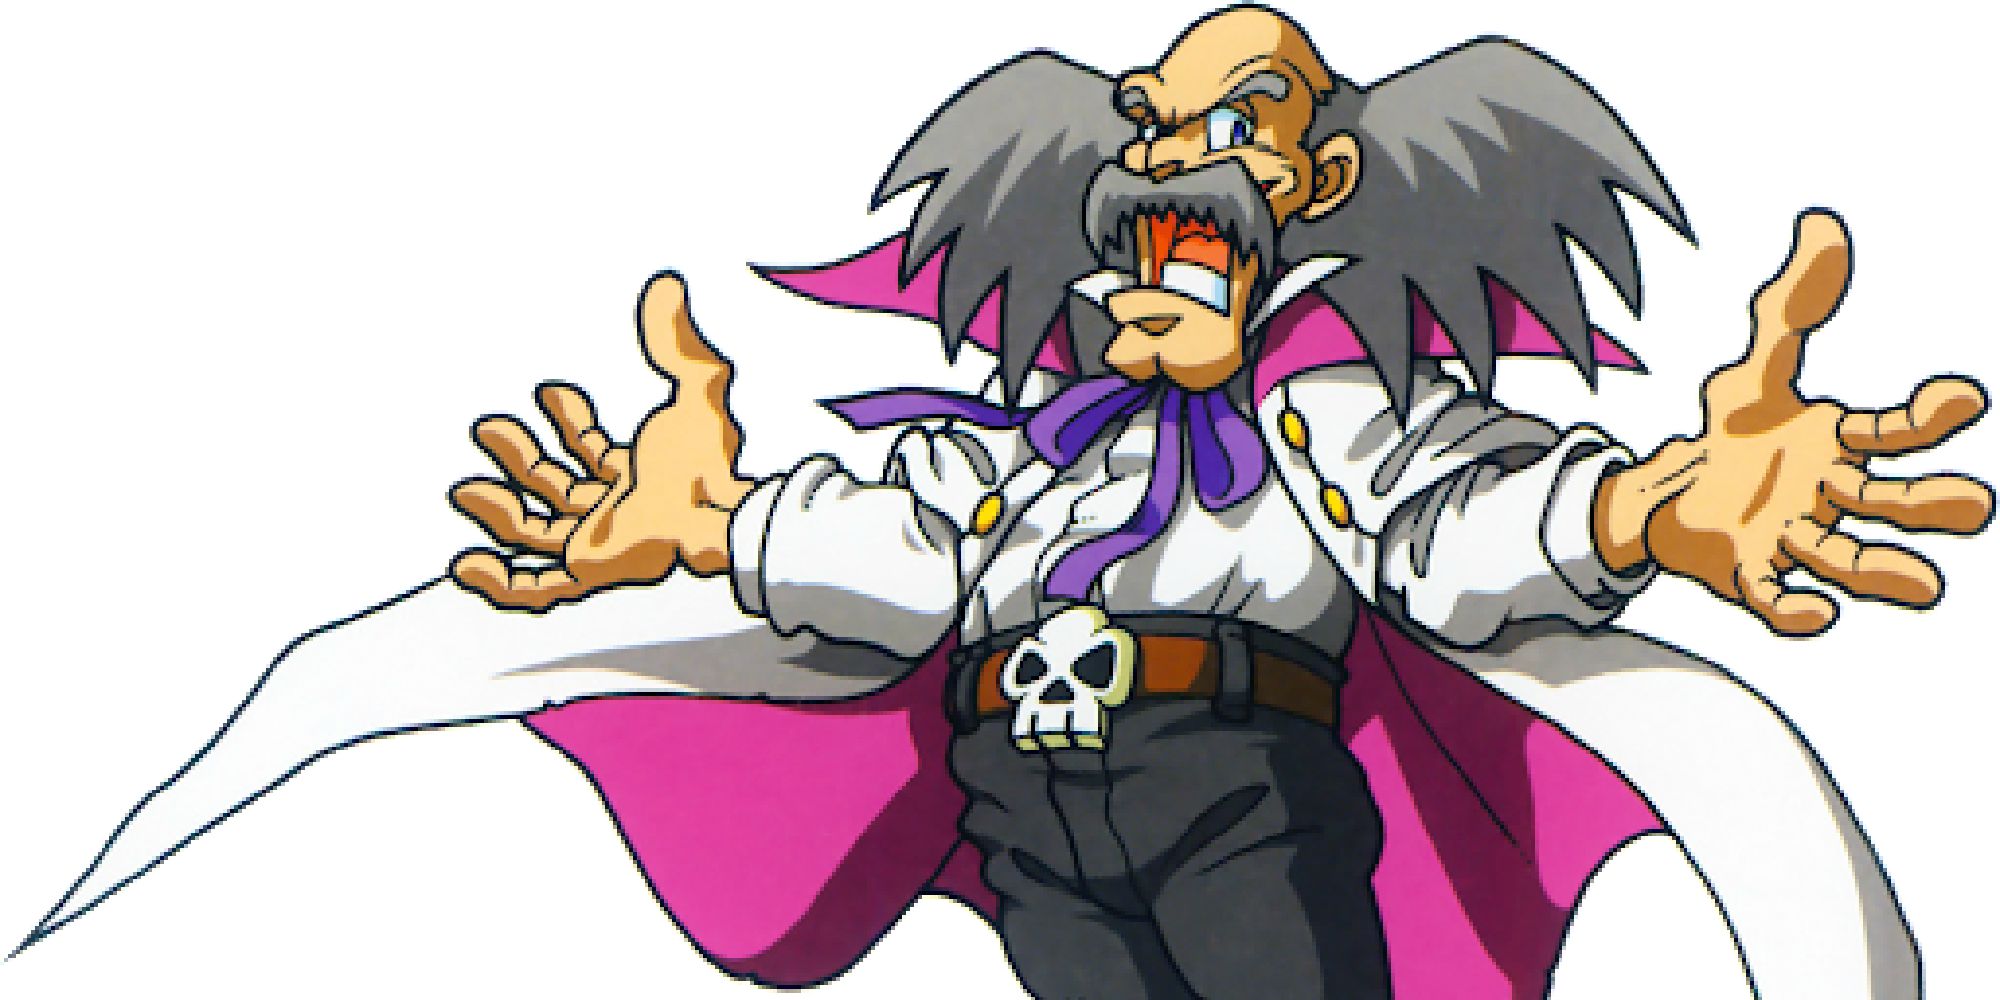 Dr. Wily from Mega Man laughs maniacally